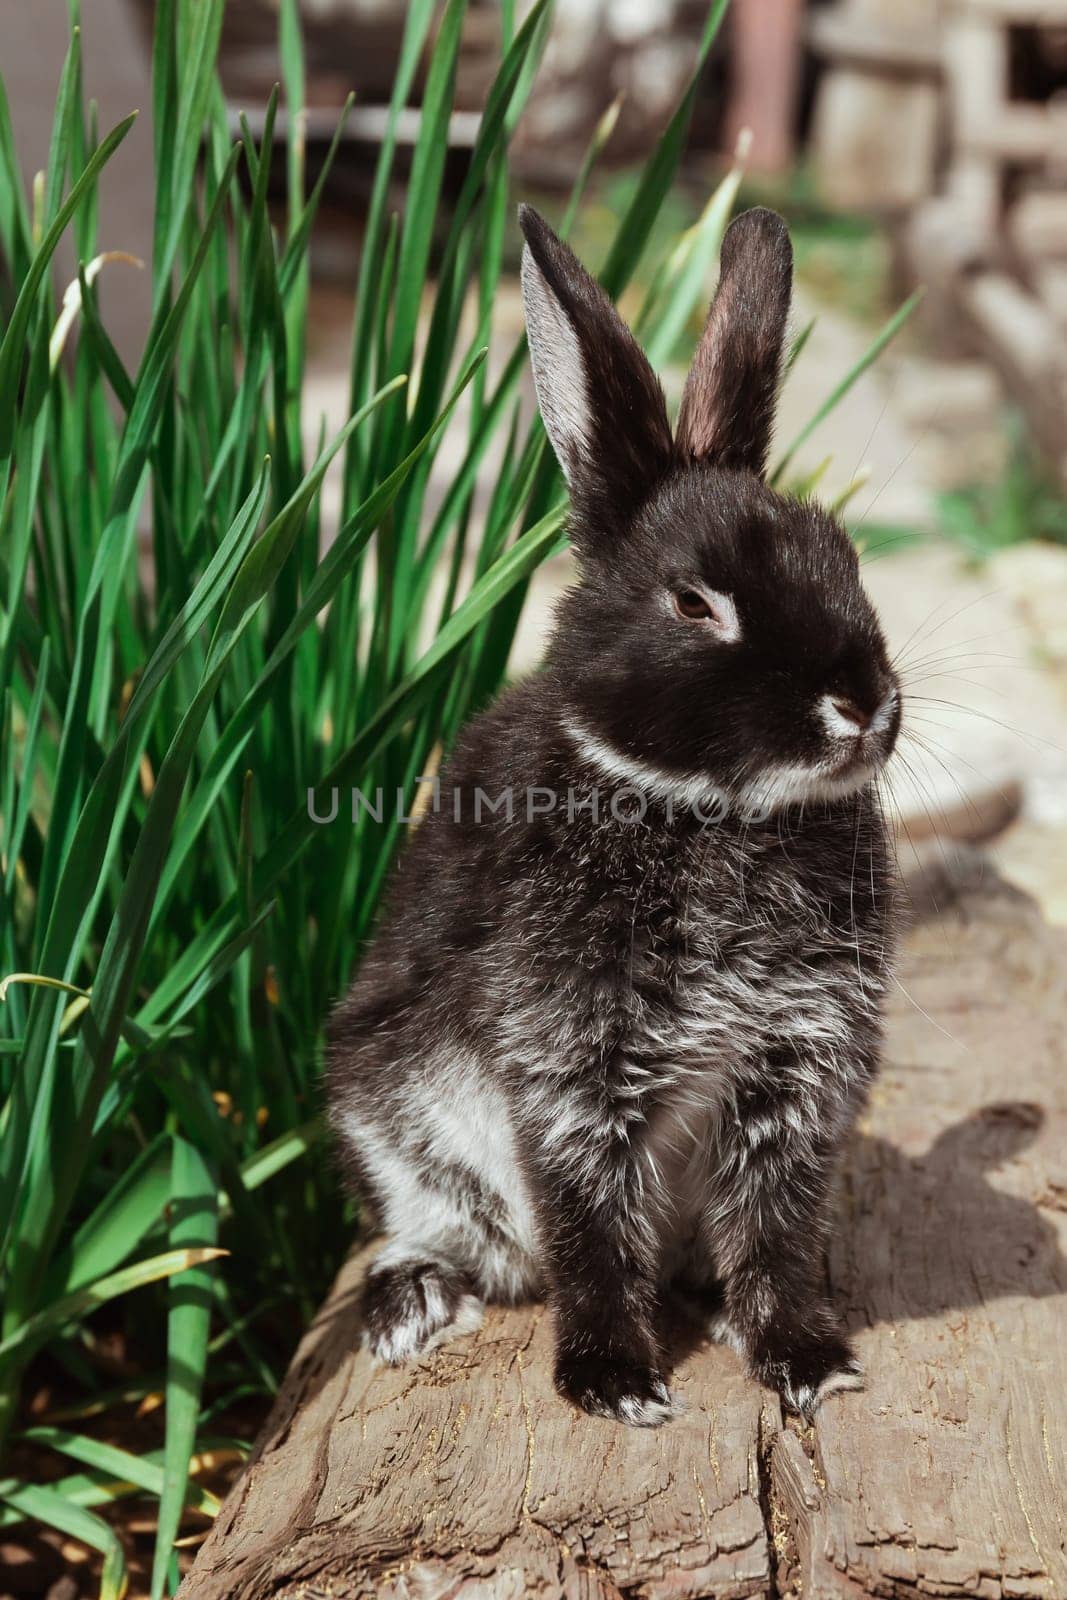 A black and white rabbit sits on wooden boards near the green grass